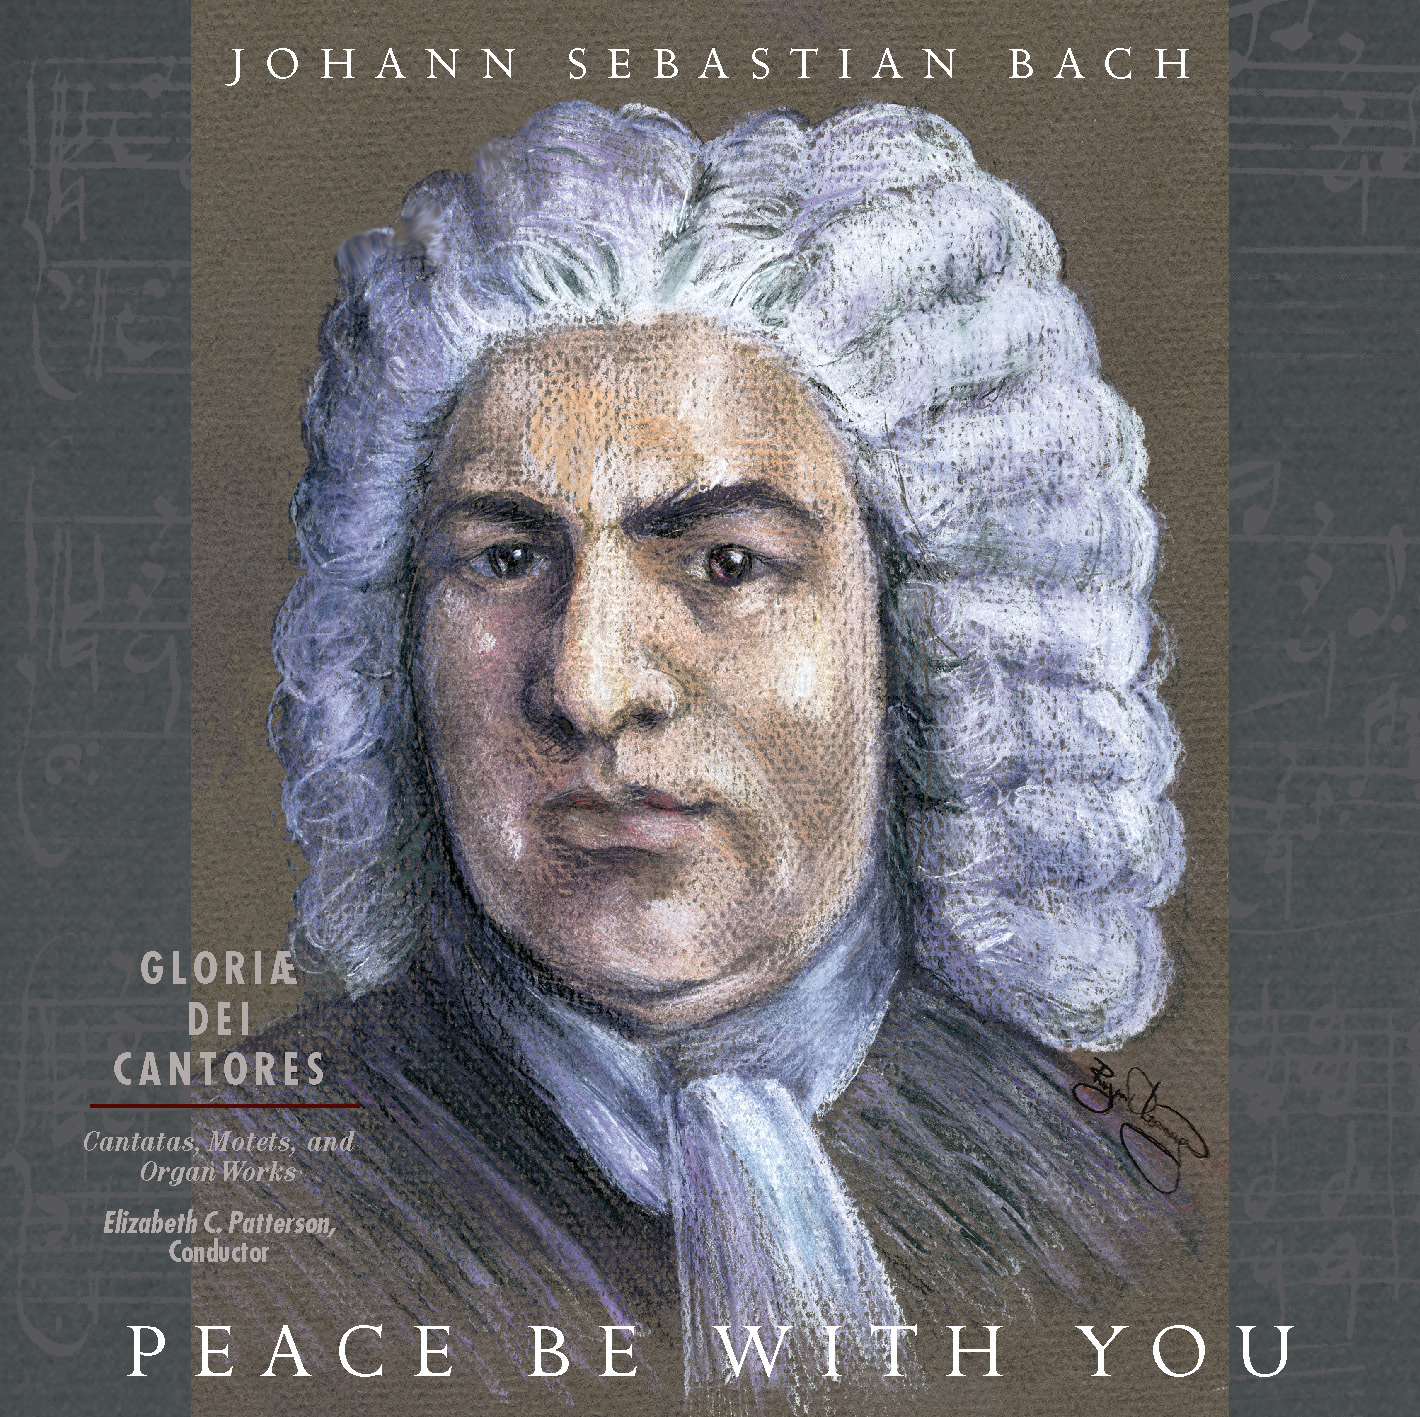 product image of 'Peace Be With You' Gloriae Dei Cantores choral recording